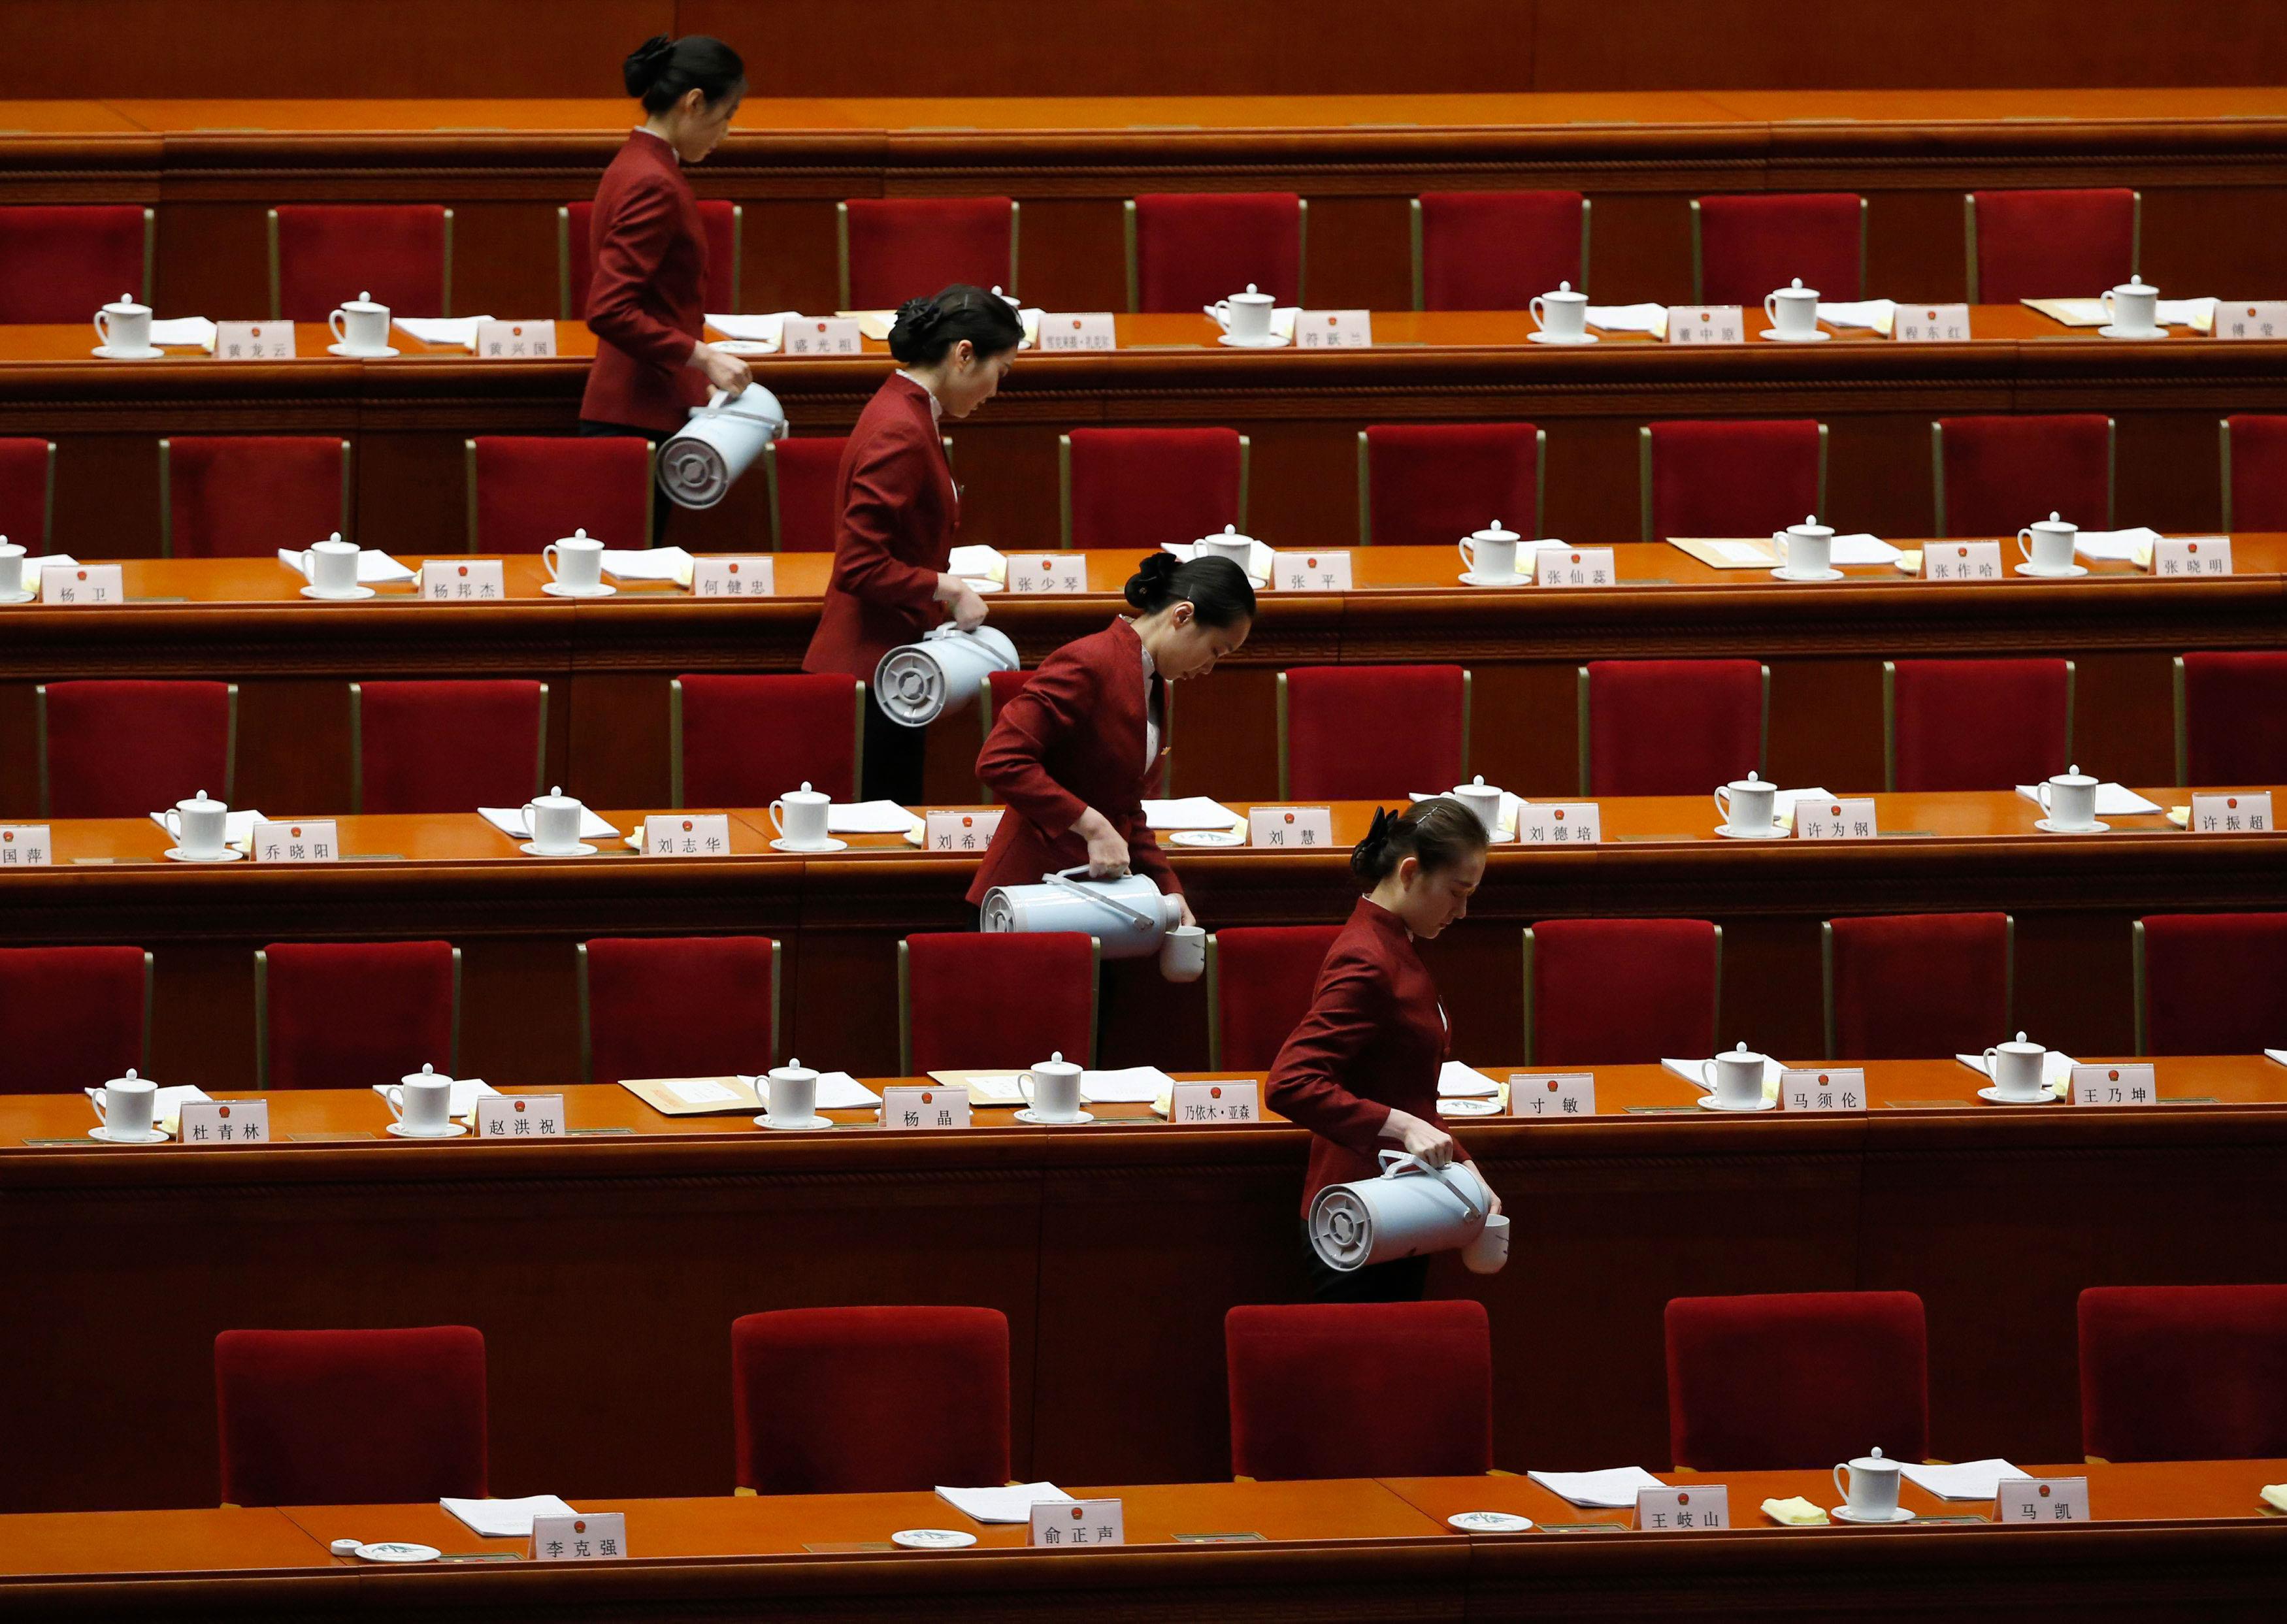 Attendants prepare tea inside the Great Hall of the People ahead of the second plenary session of th